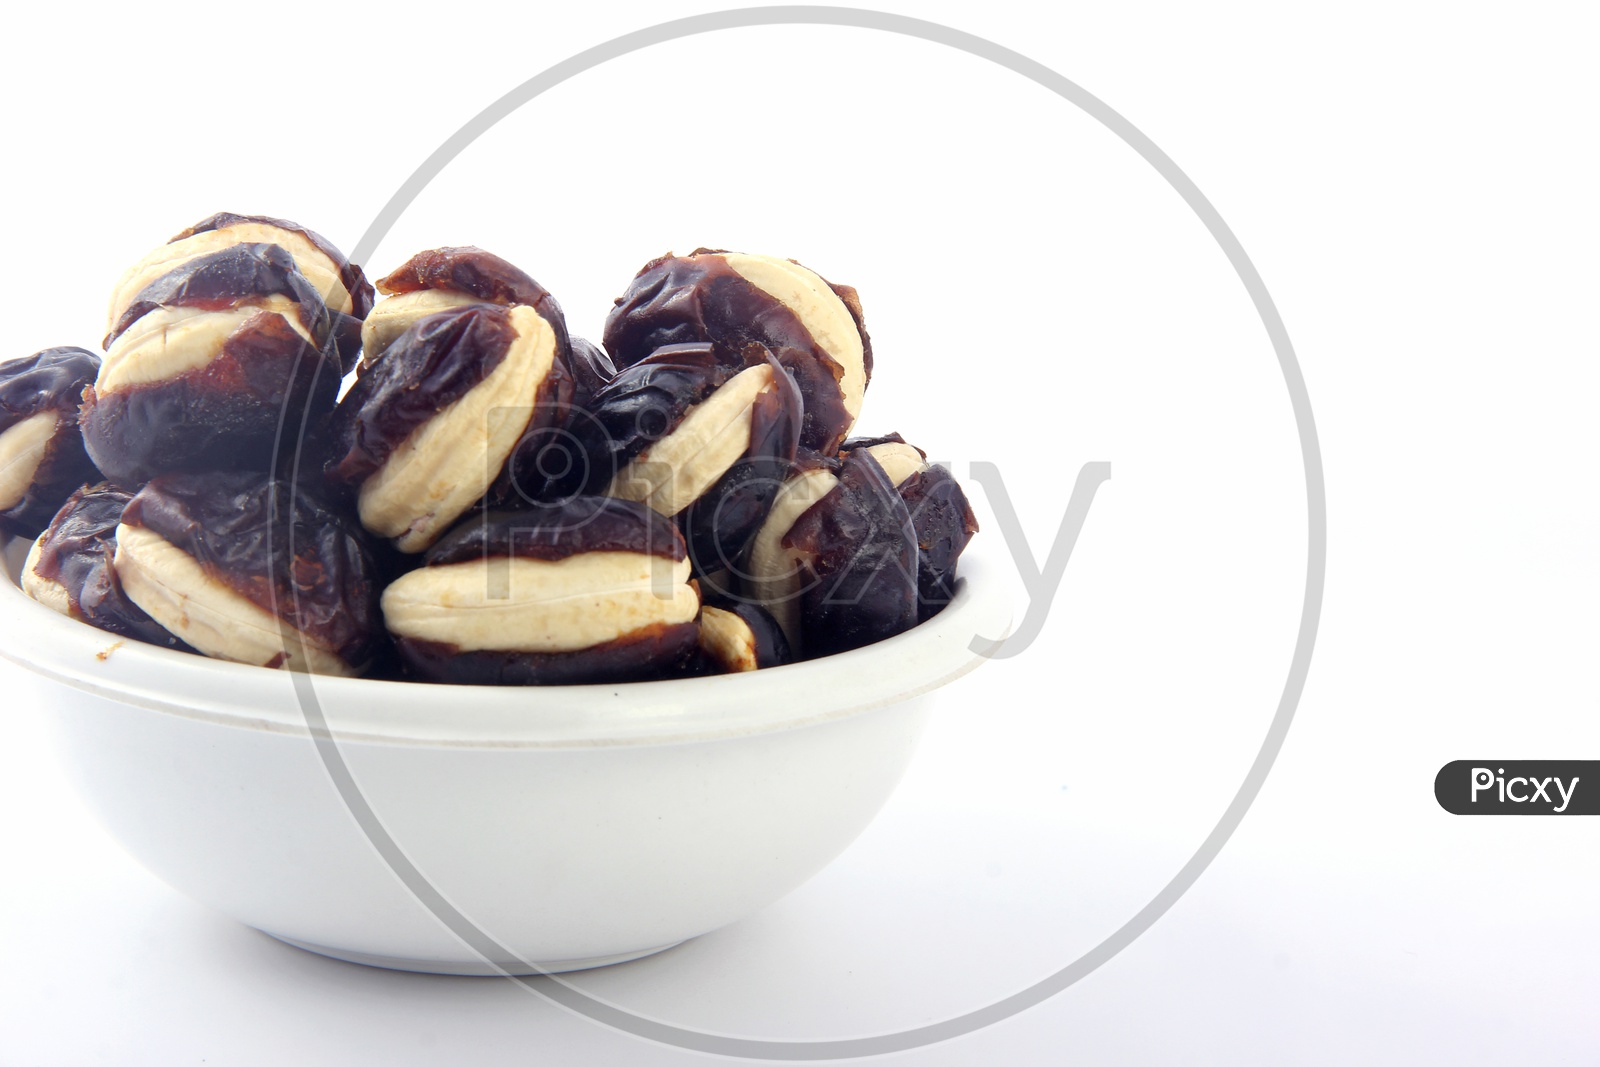 Cashew-Stuffed Dates in Bowl Isolated in White Background